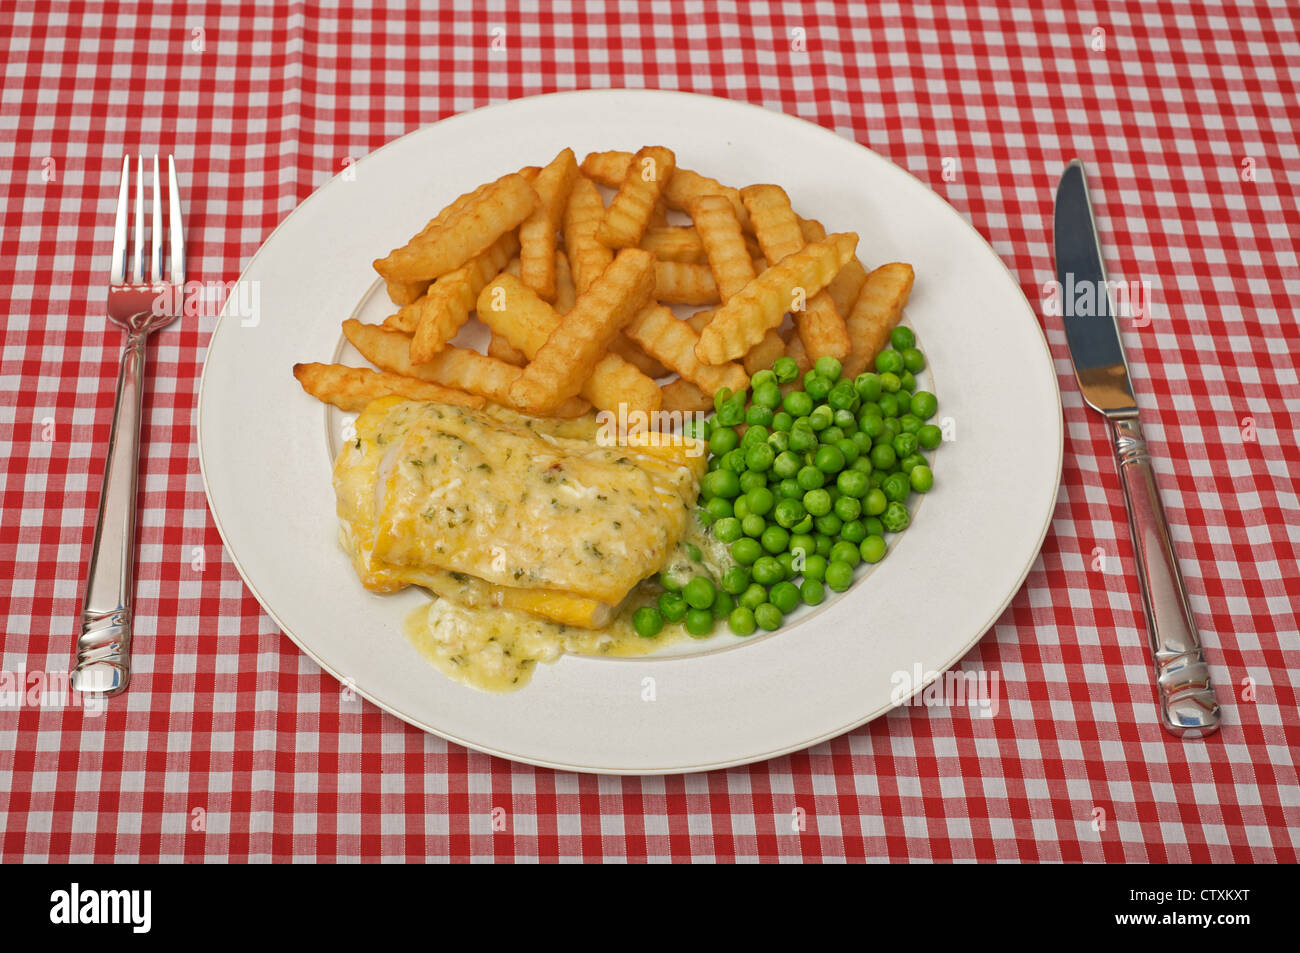 The Saucy Fish Co. Davidstow cheddar and chive sauce on smoked Haddock, chips and peas Stock Photo